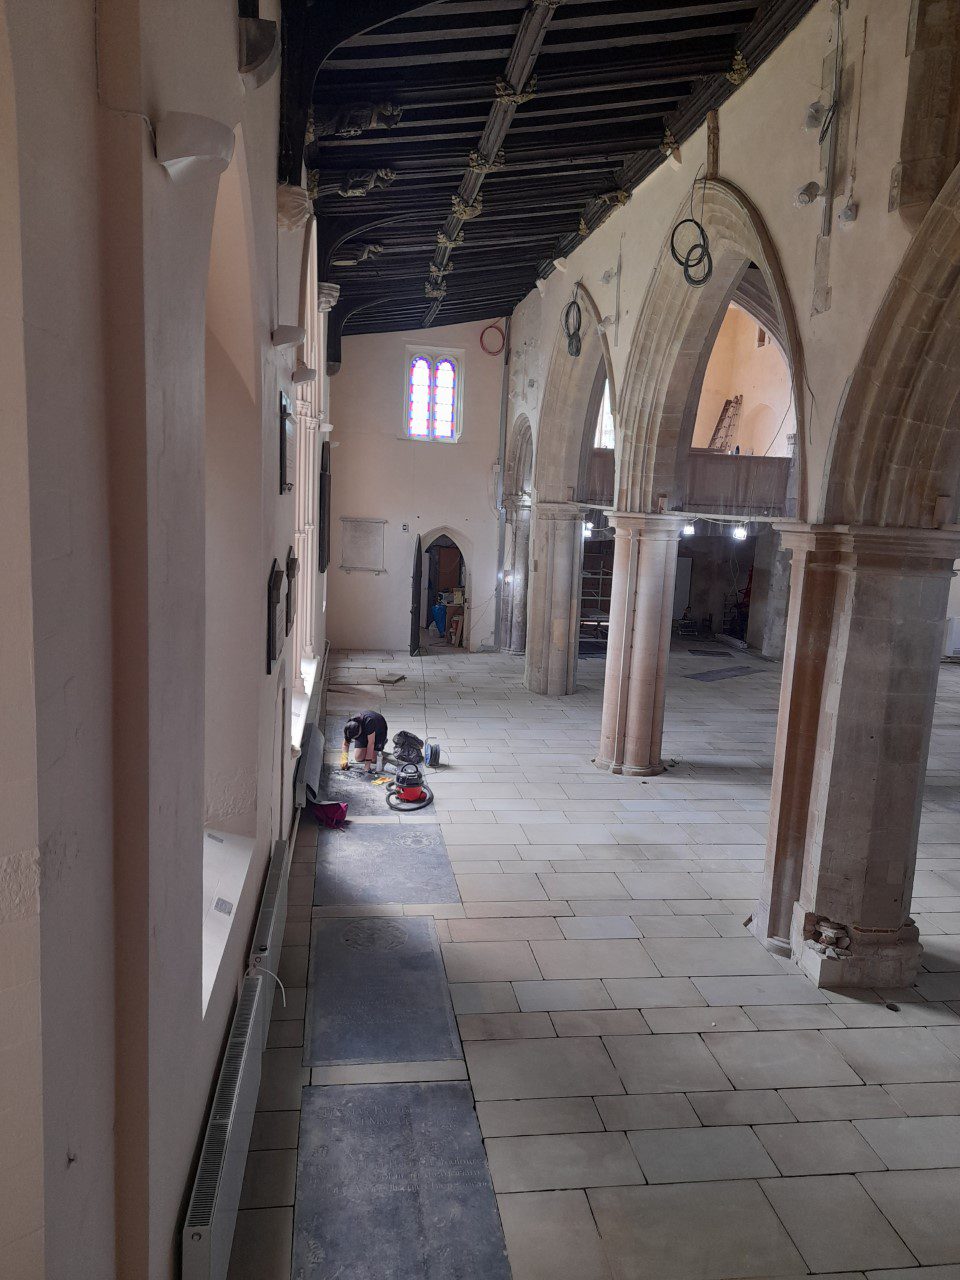 Conservation clean of the Ledger slabs and wall memorials, ST JOHN THE BAPTIST CHURCH, ROYSTON.